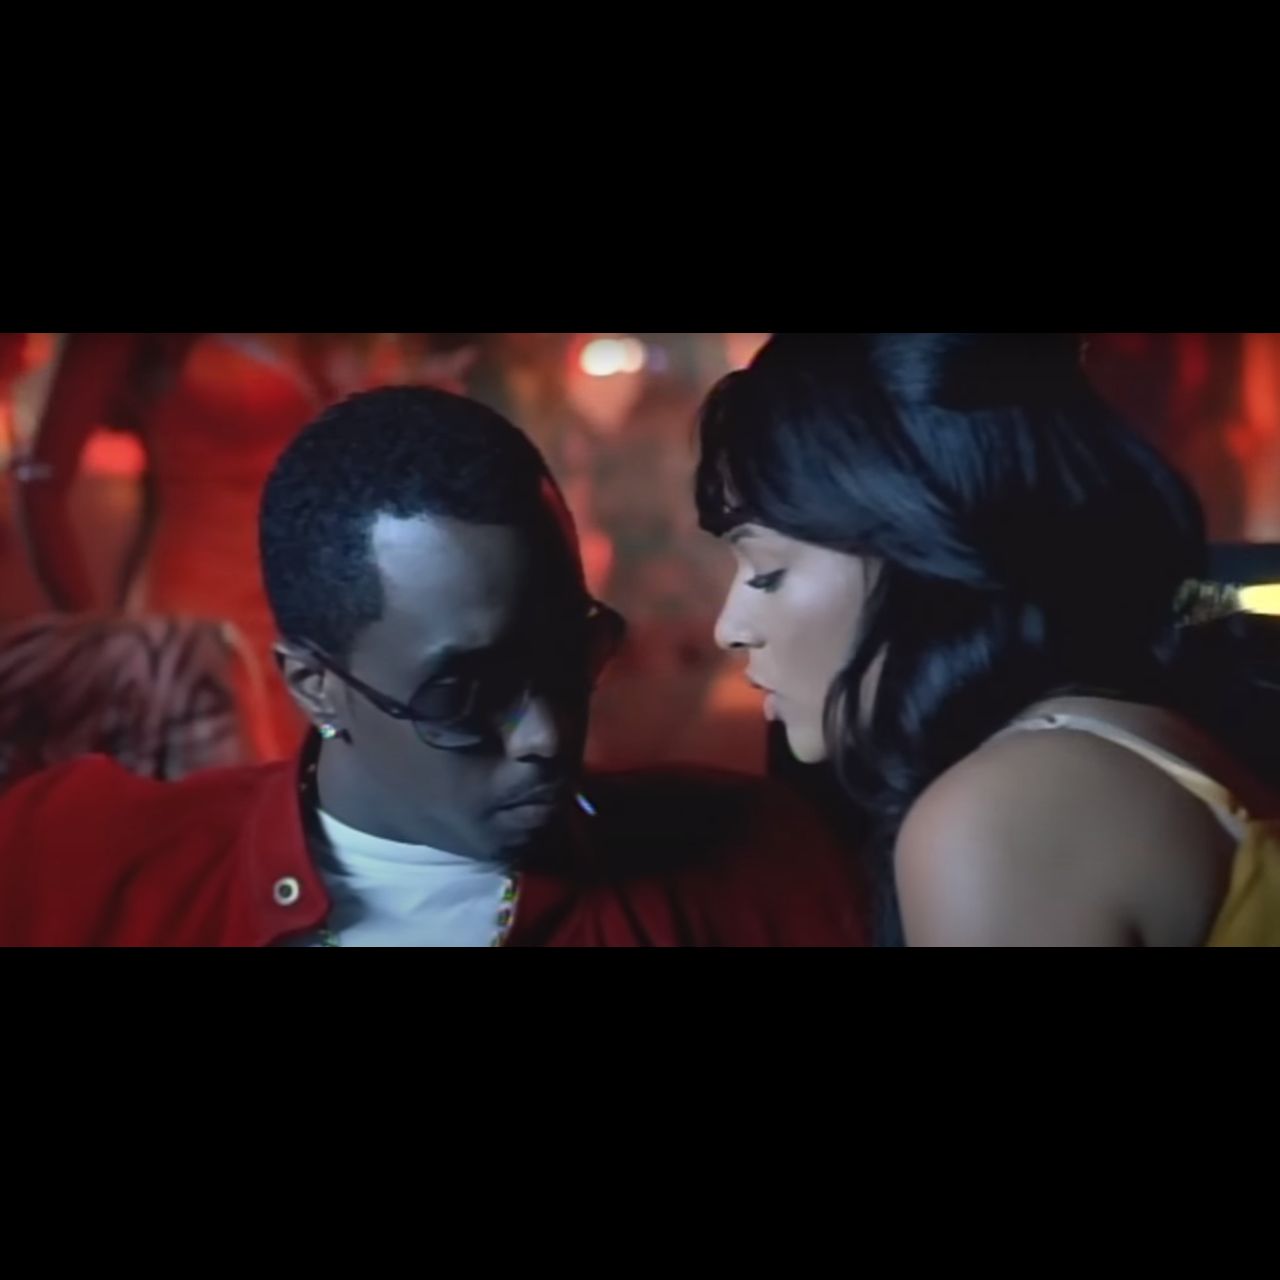 Diddy - Through The Pain (She Told Me) (ft. Mario Winans) (Thumbnail)